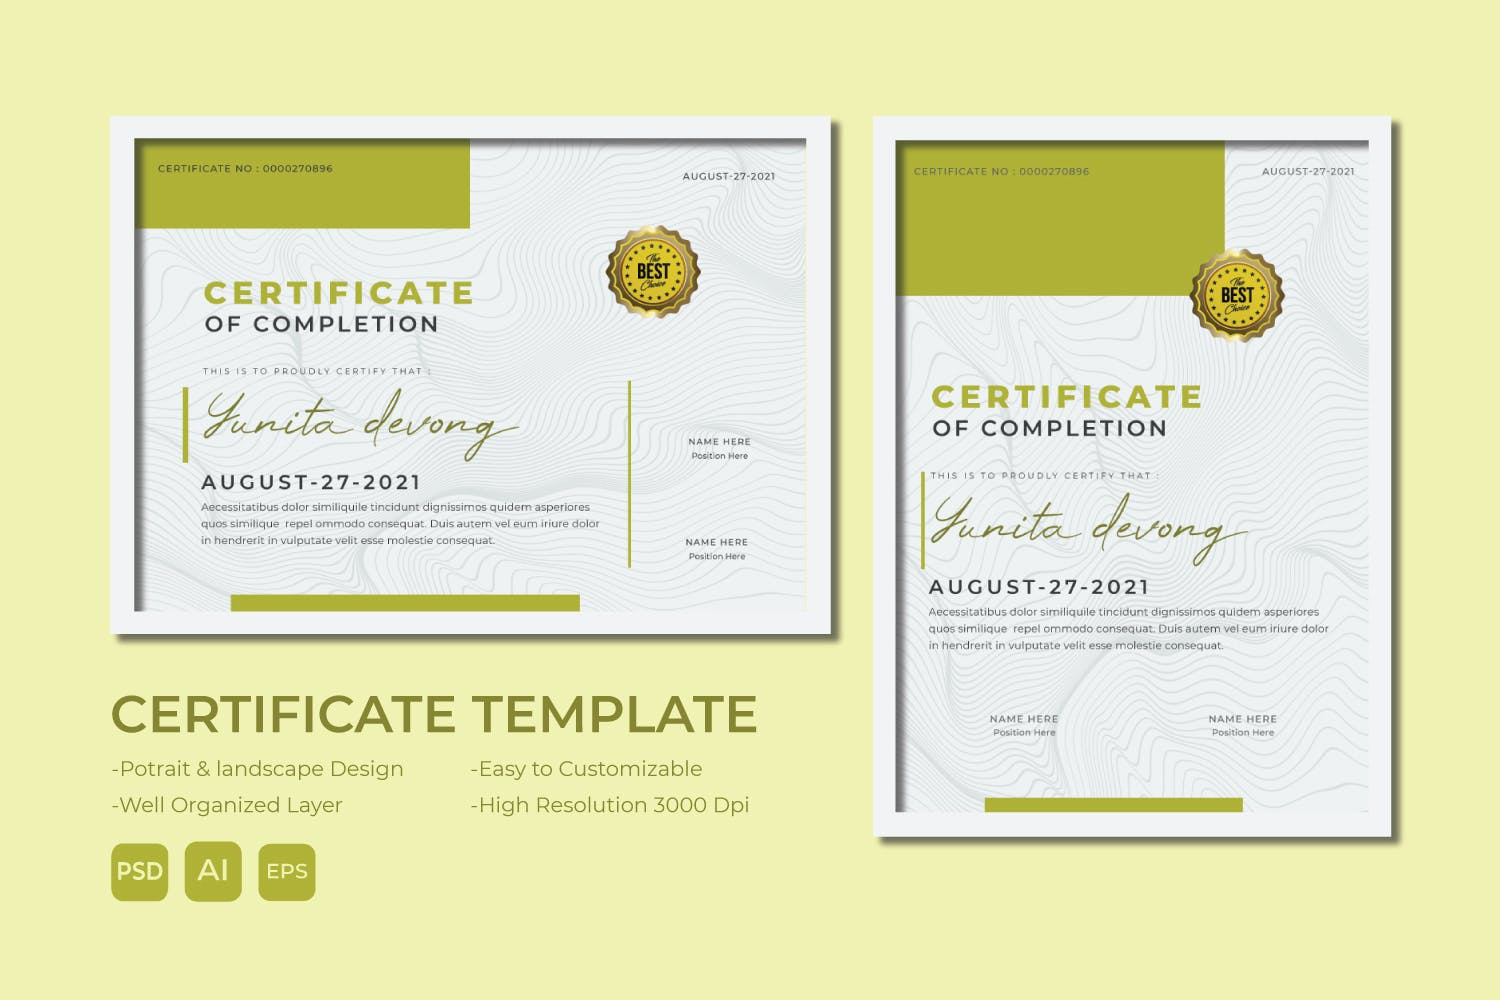 10+ Best Certificate Templates for Microsoft Word 1022 - Theme Junkie Inside Microsoft Word Certificate Templates